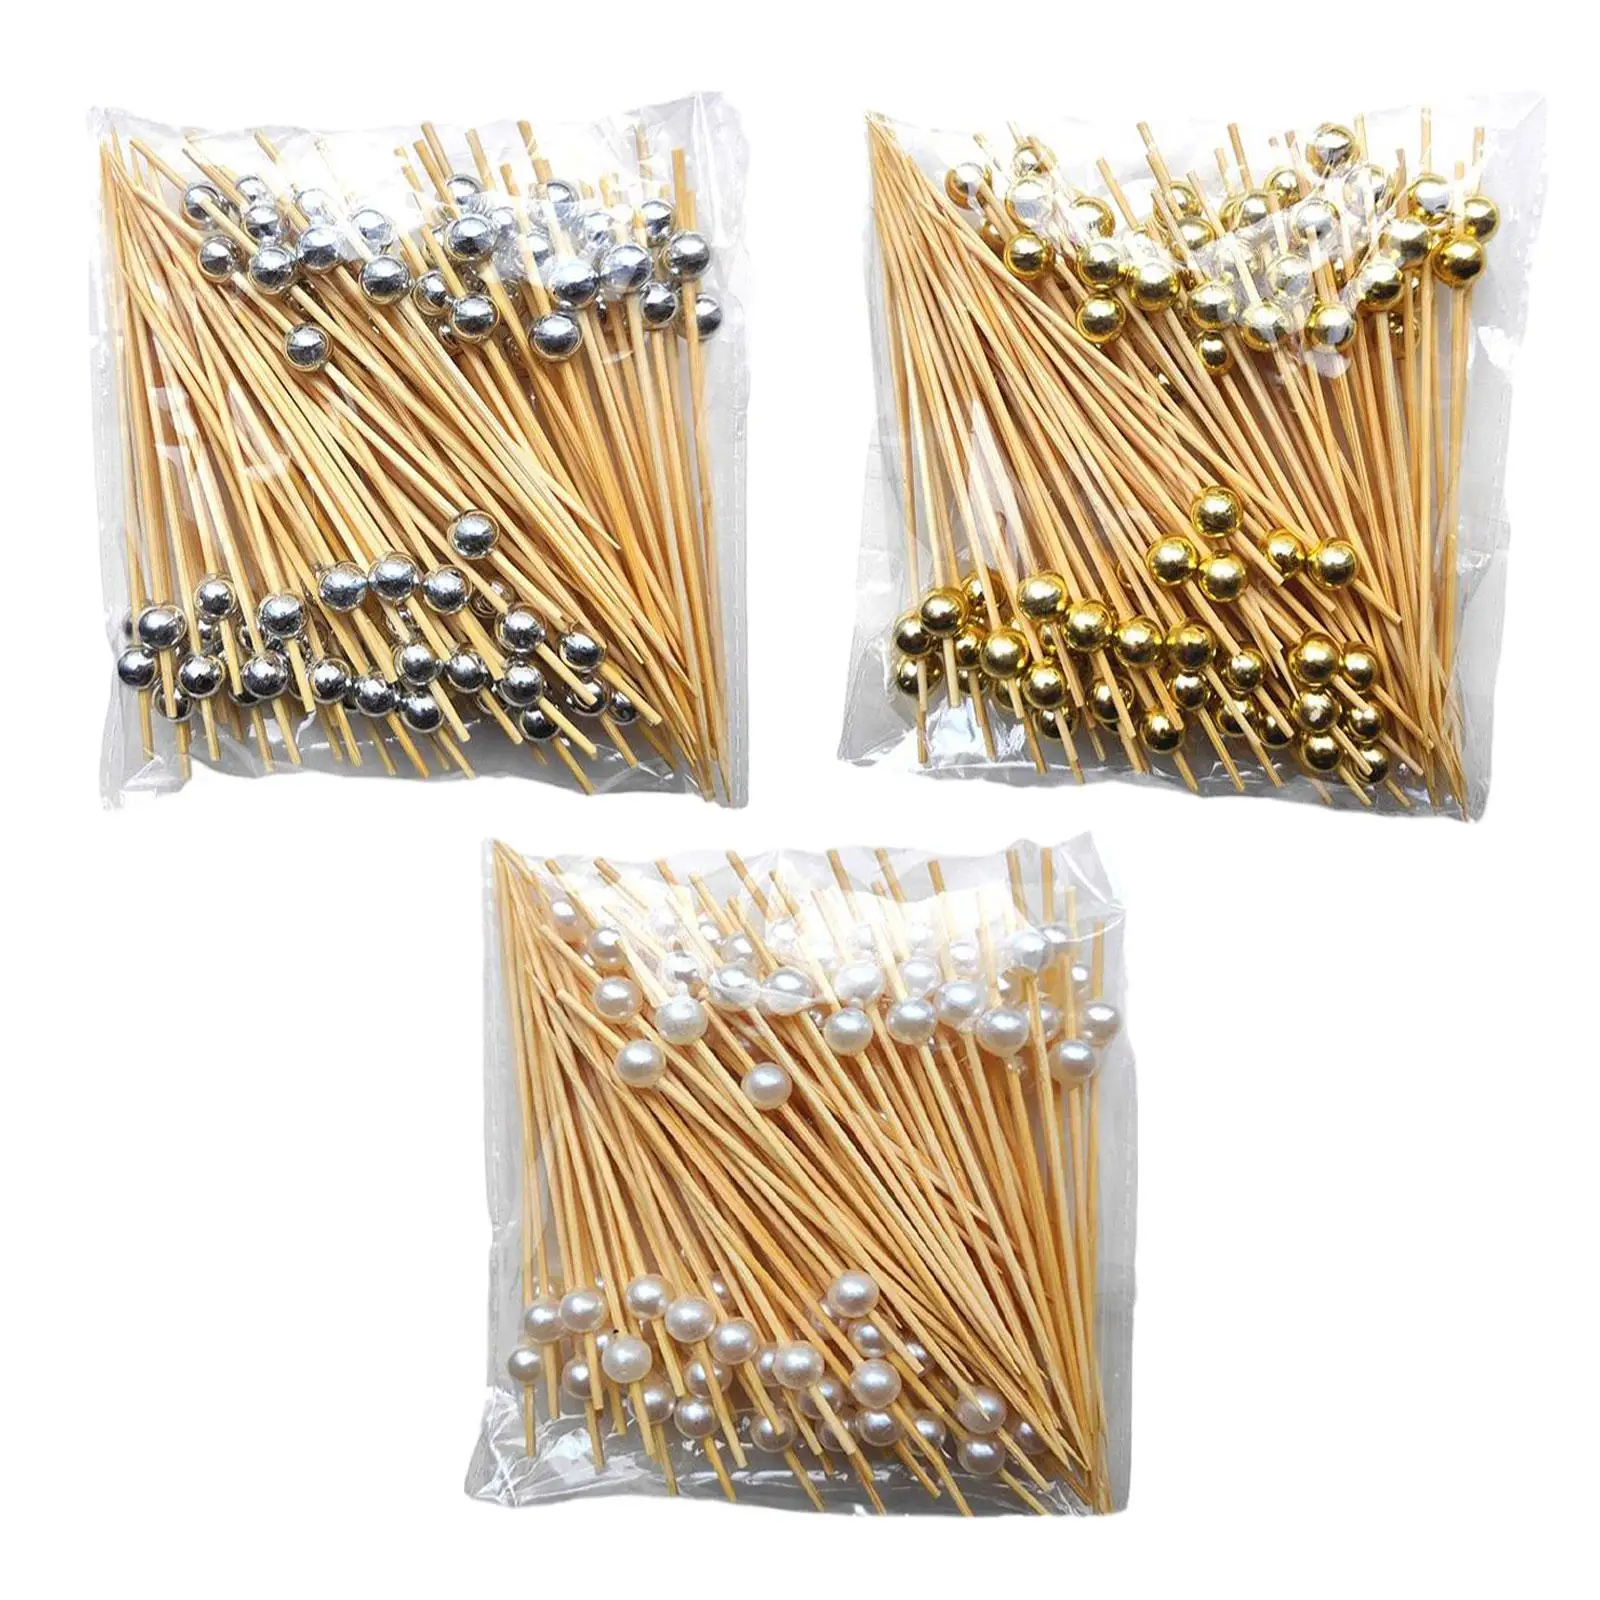 300 Pieces Fruit Kabobs Pearl Decorative Snack Fancy Cocktail Sticks Appetizer Forks for Party Pastry Appetizer Wedding Holiday